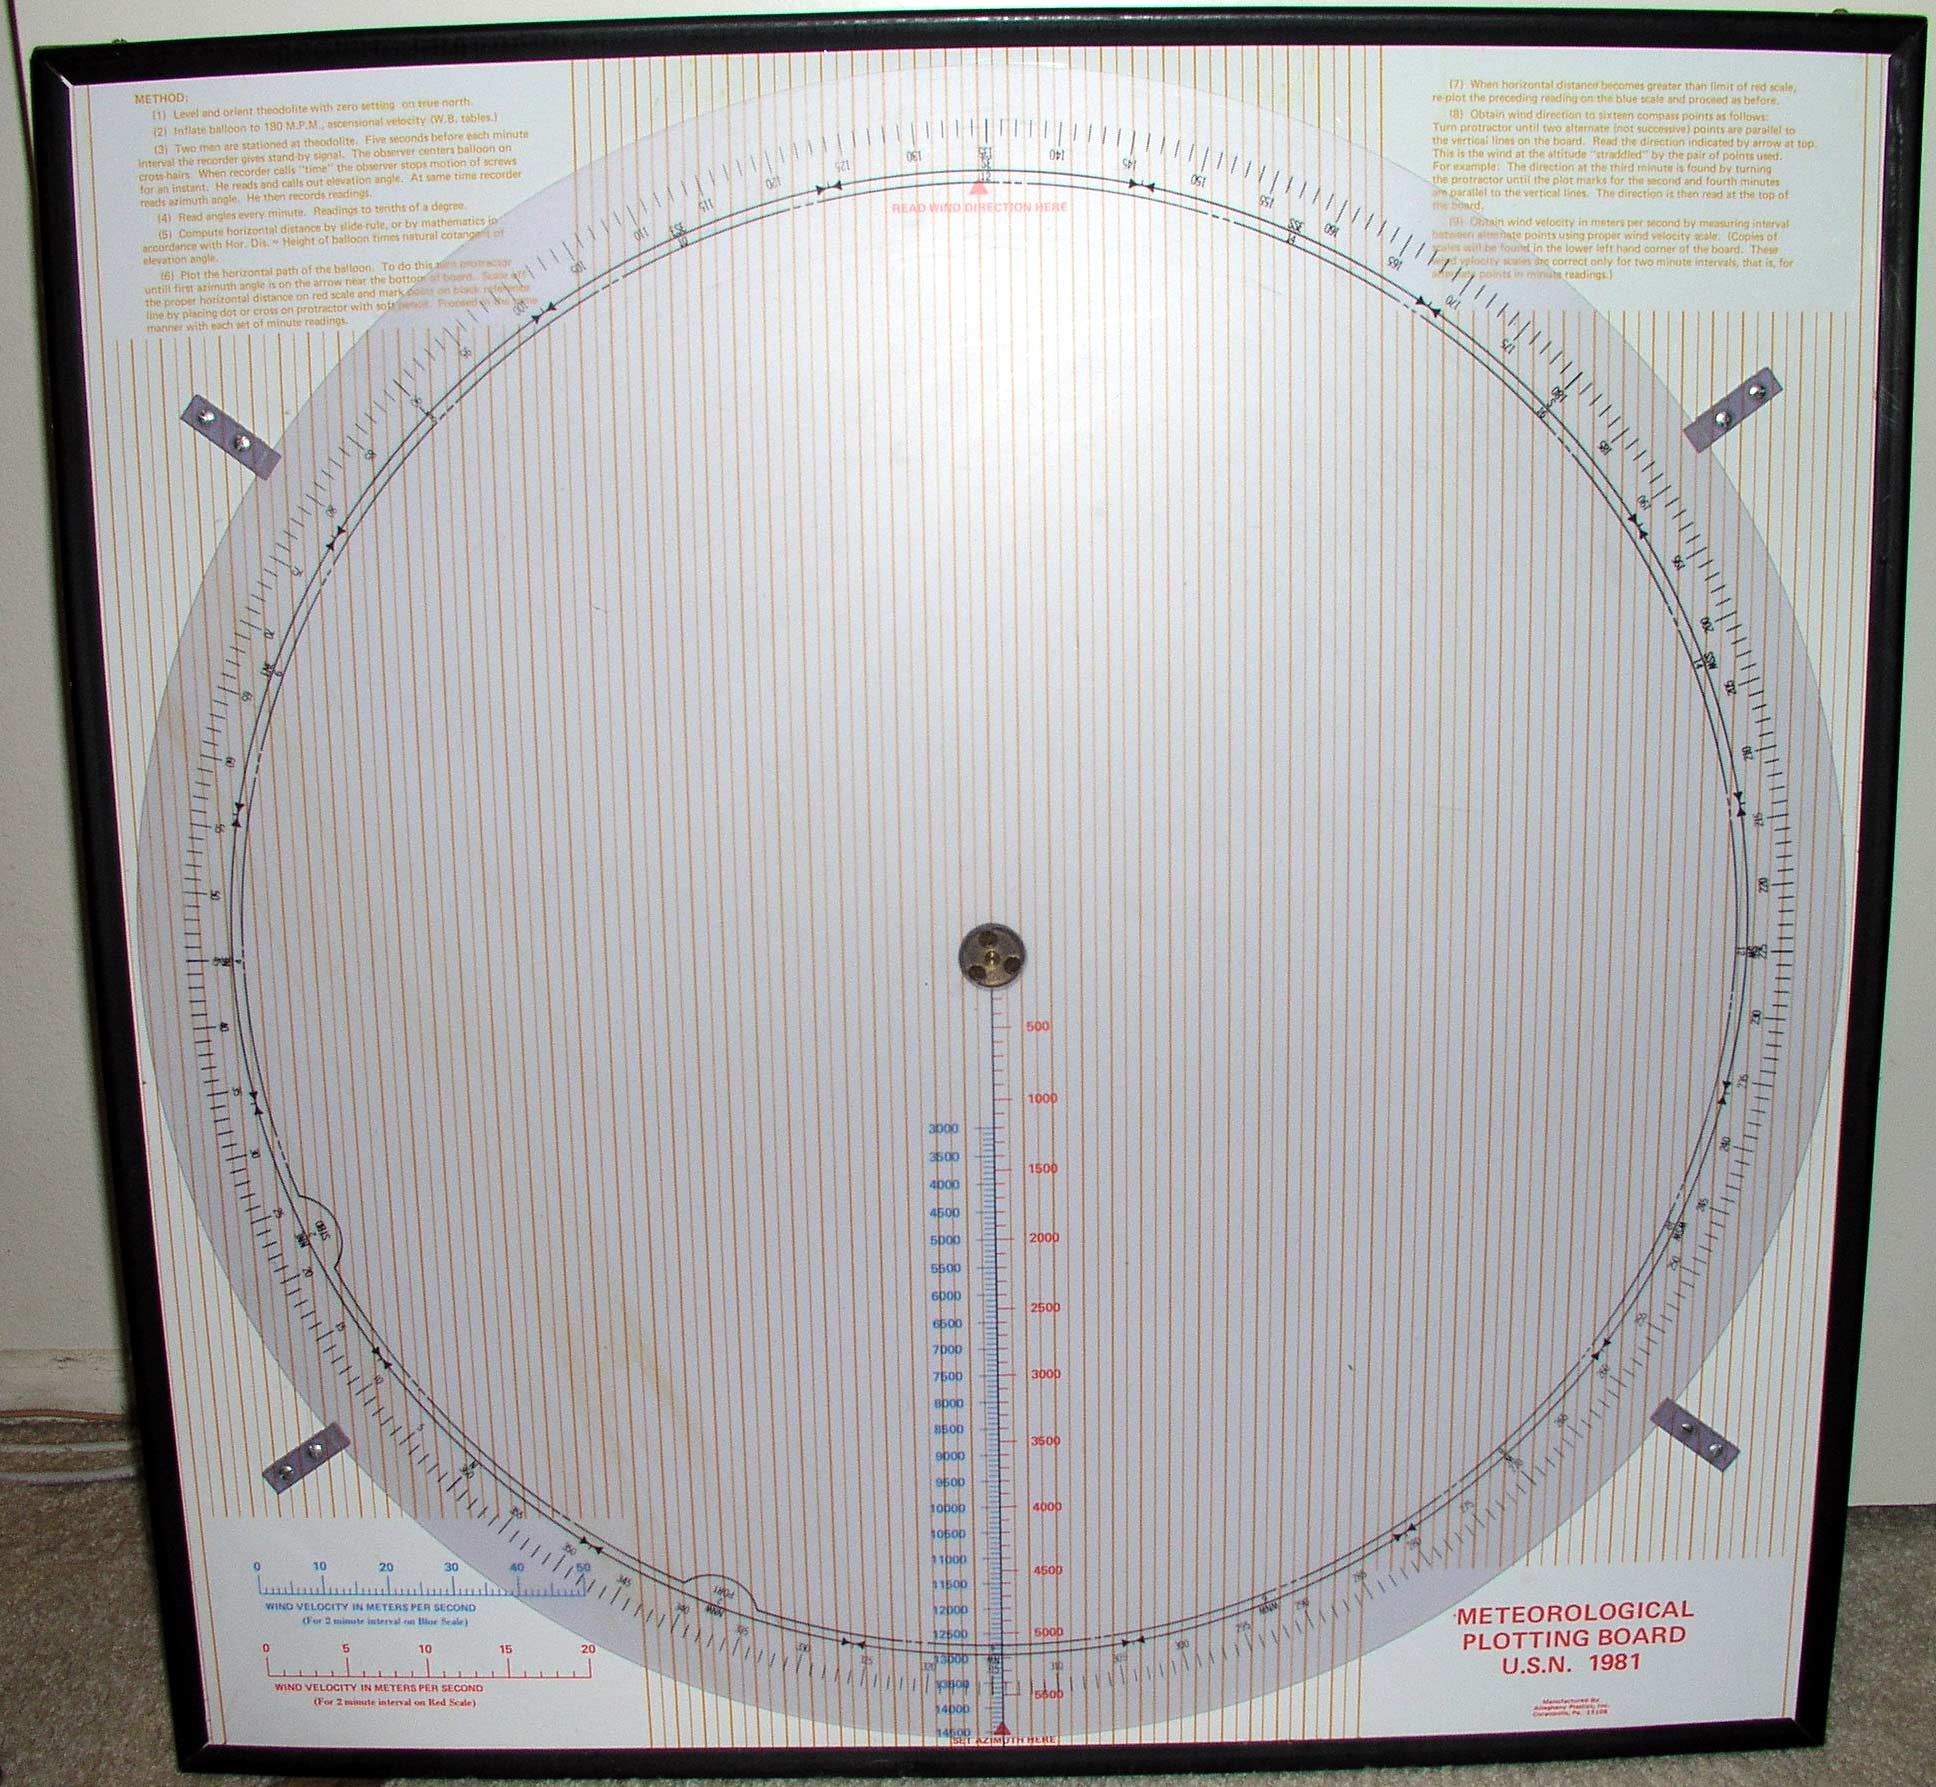 This is a large image of a Pilot Balloon Plotting Board.  It shows detail including instructions, wind scales and compas rose.